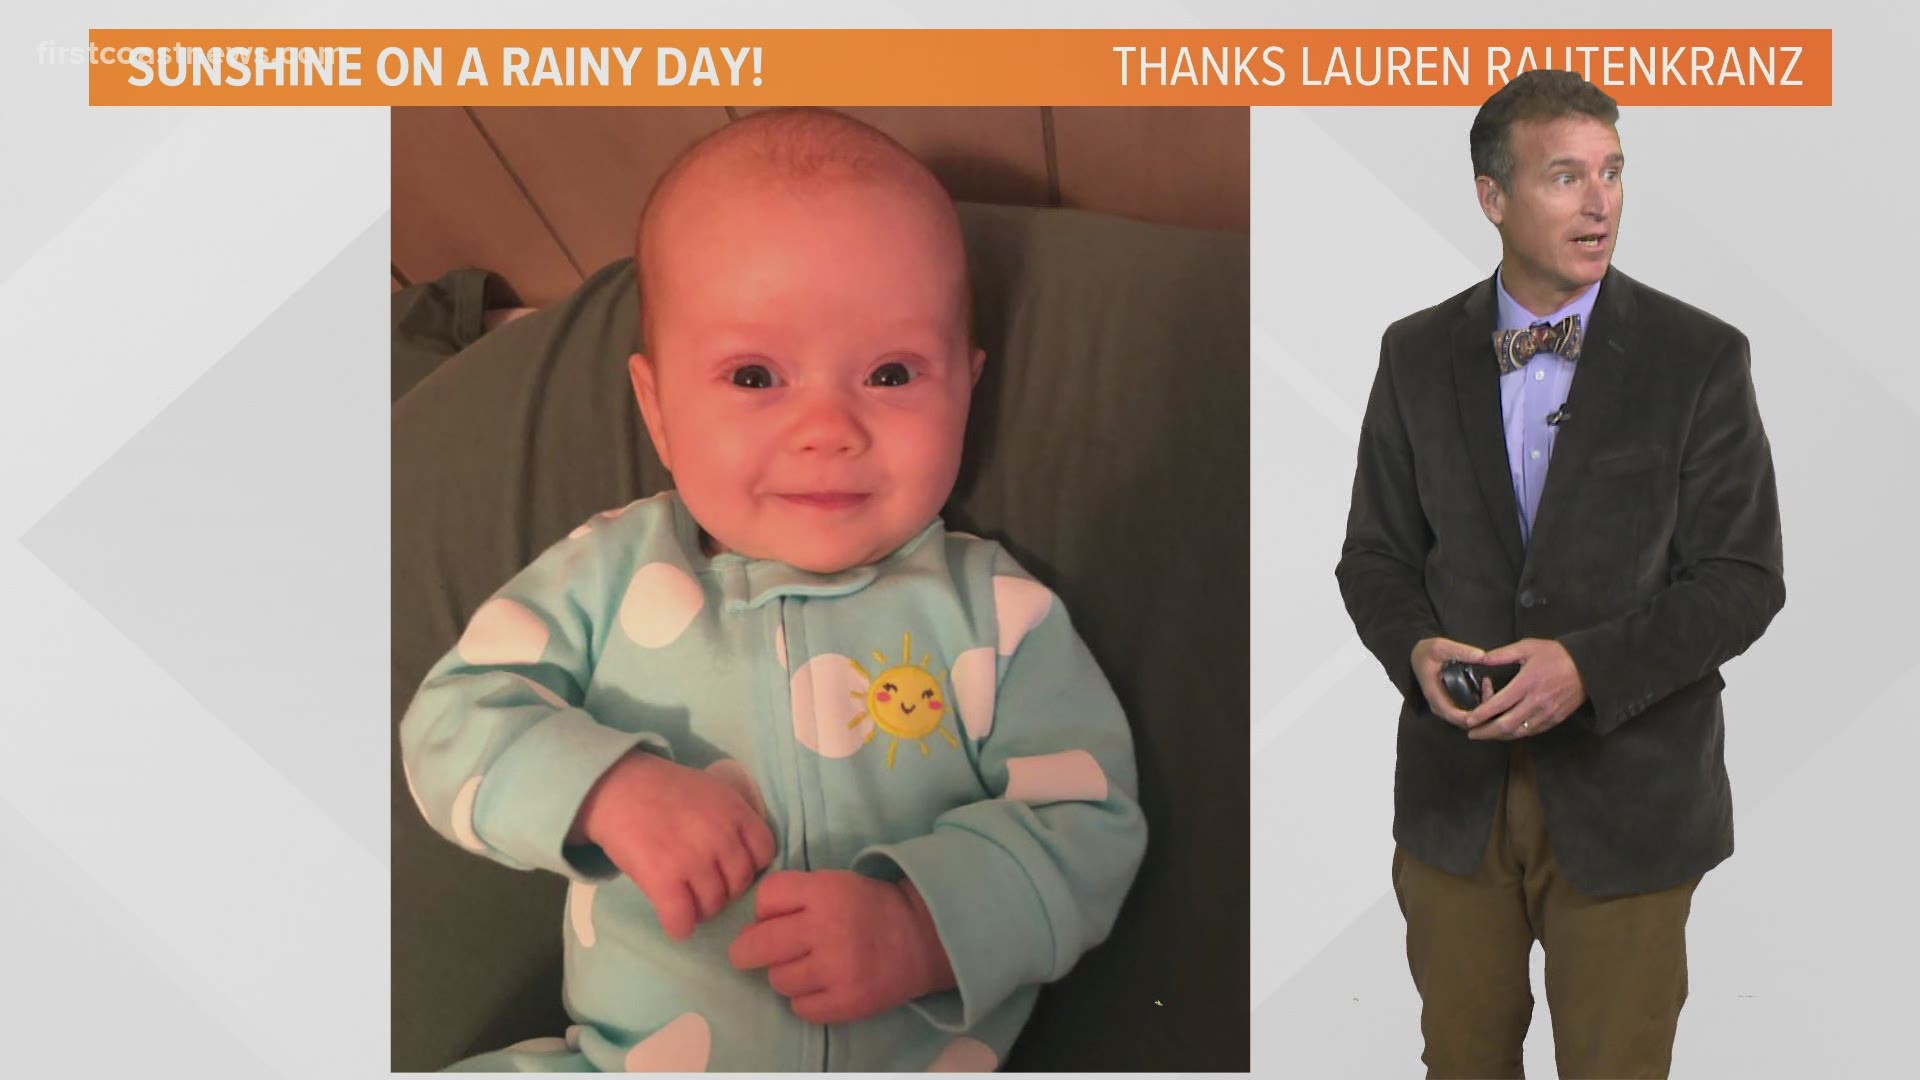 Lauren Rautenkranz will be back with the First Coast News family soon, but her newborn baby says hello to bring us some sunshine on this cloudy day!